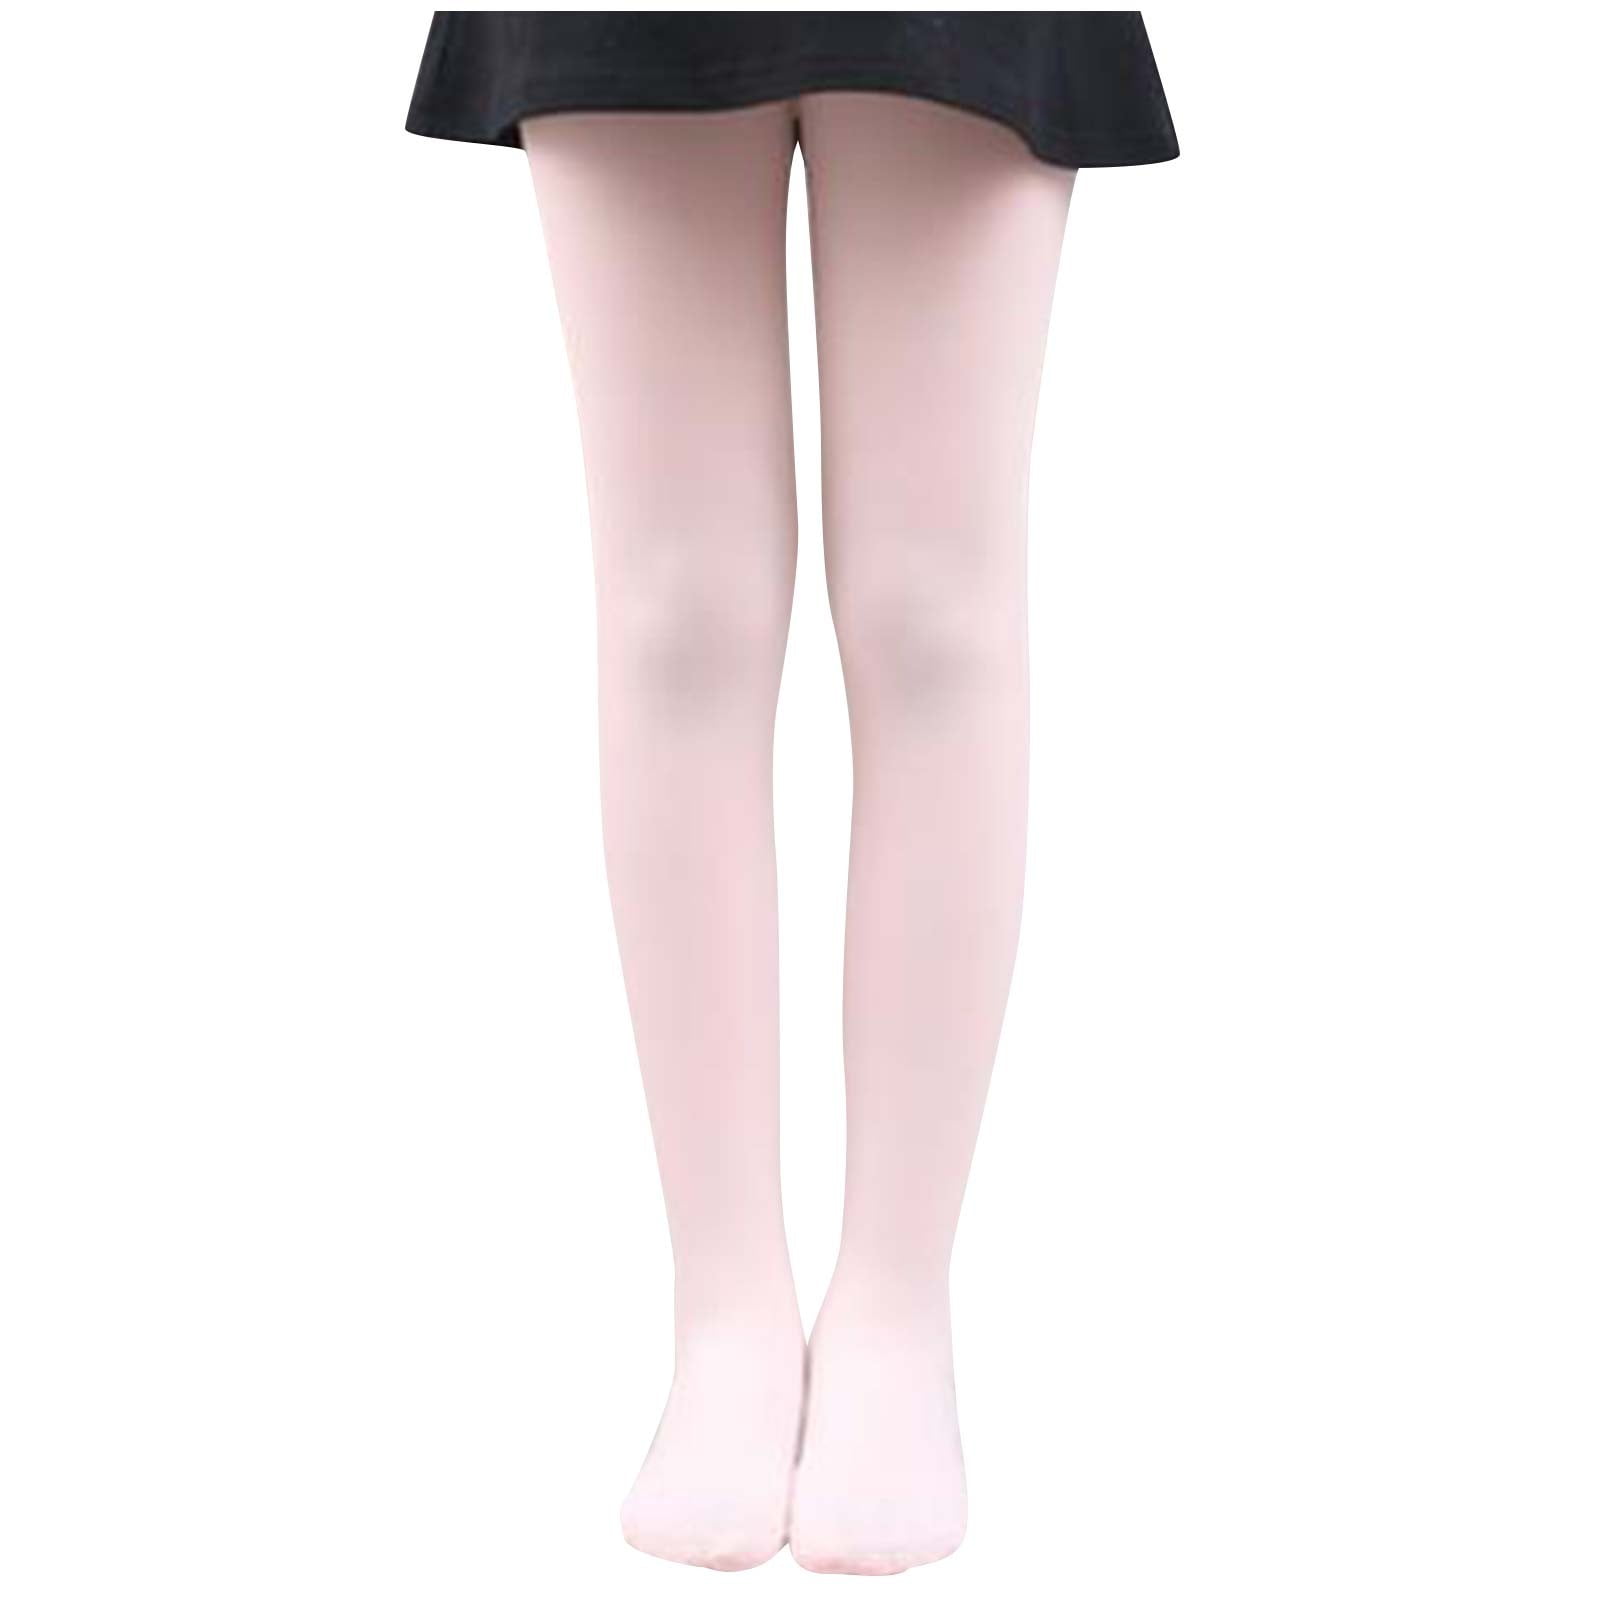 HBYJLZYG High Waisted Tights Solid Color Pantyhose, For Women All Age ...